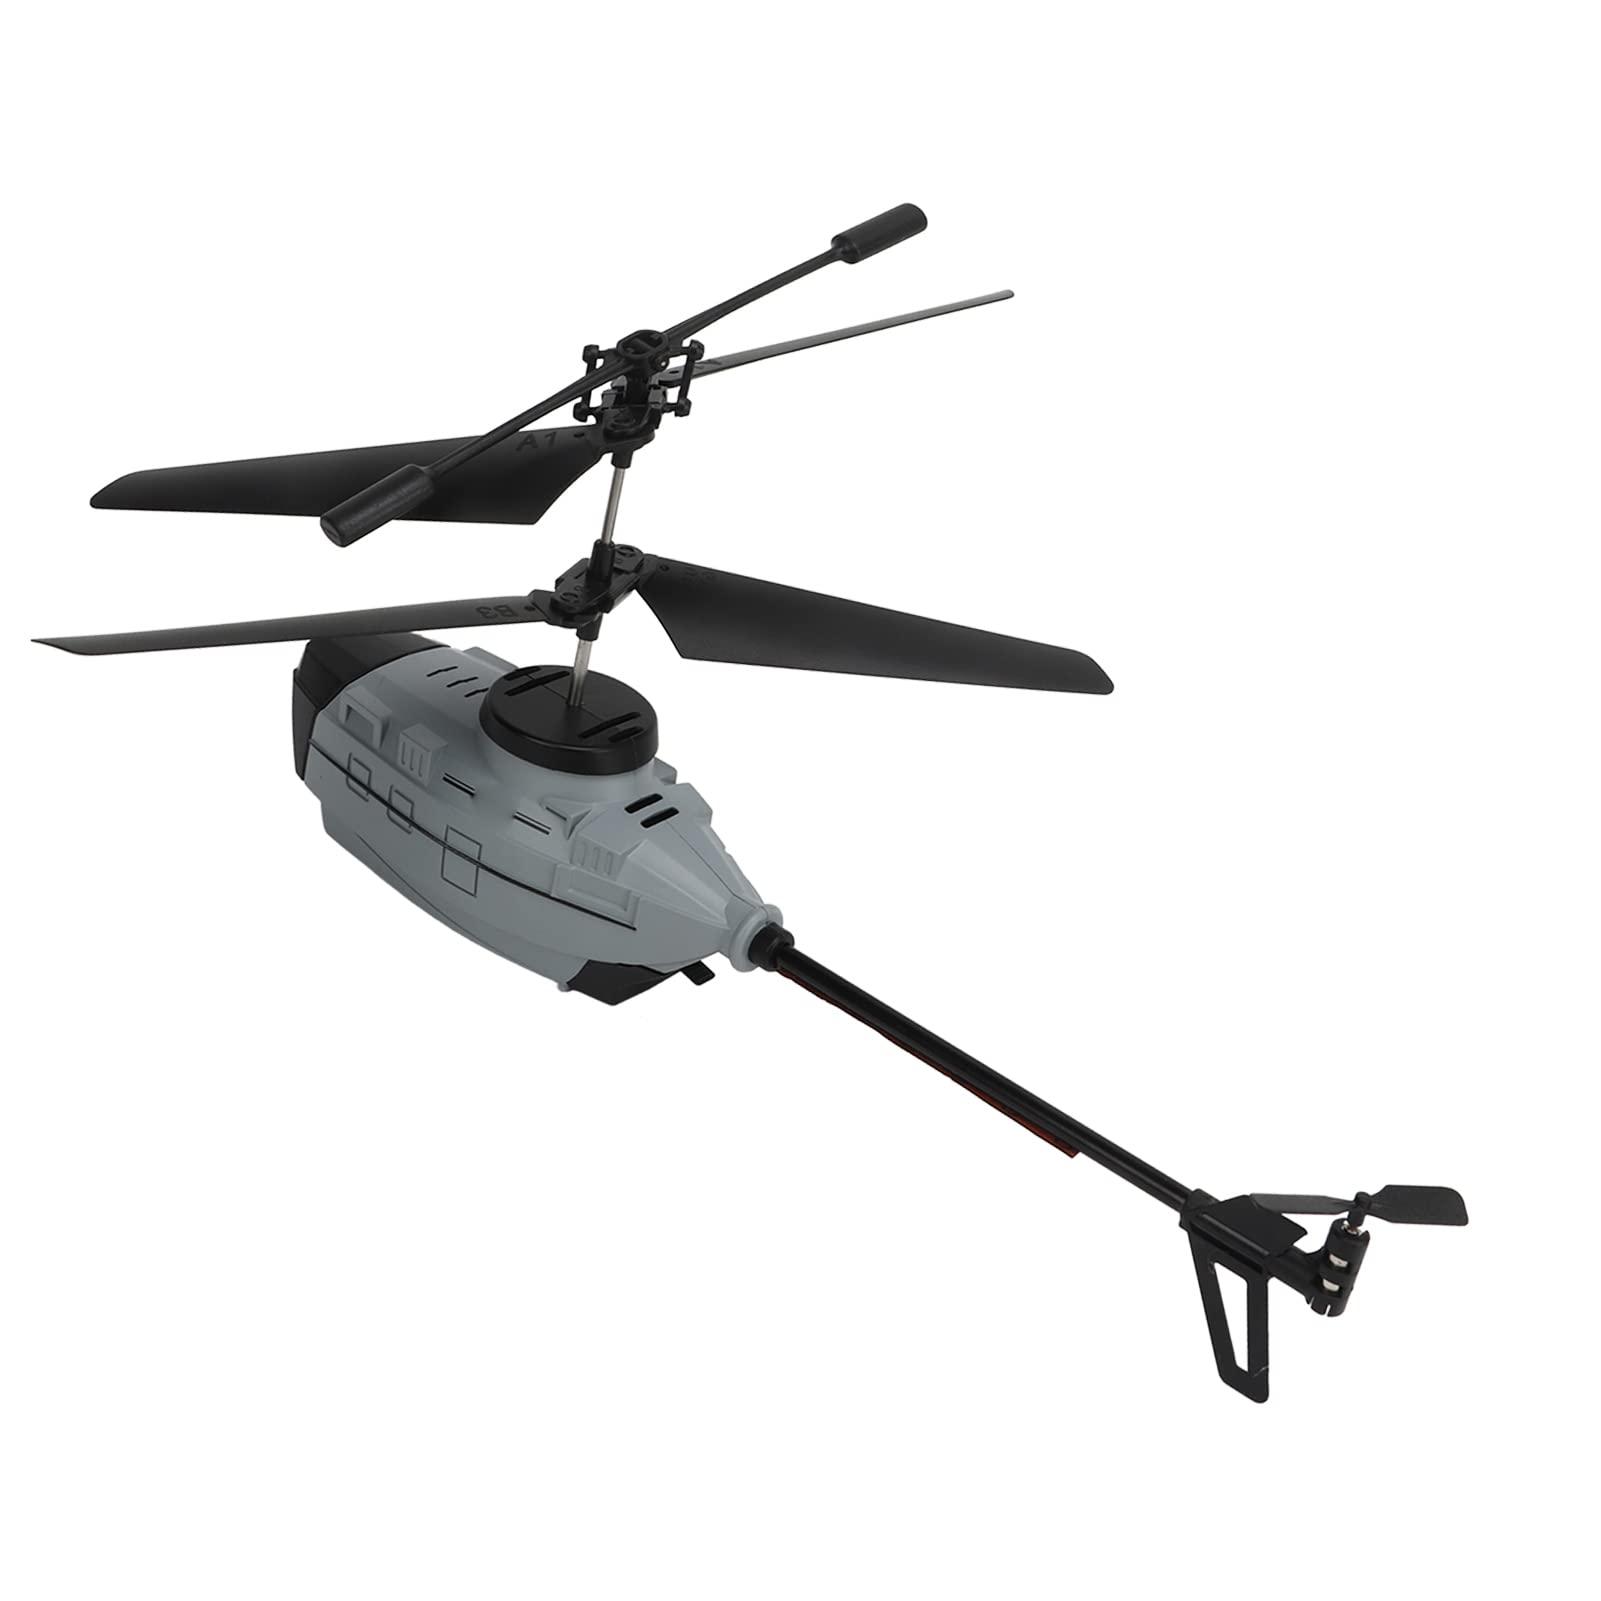 Rc Helicopter Not Flying: Ensuring your rc helicopter's longevity through preventative measures.